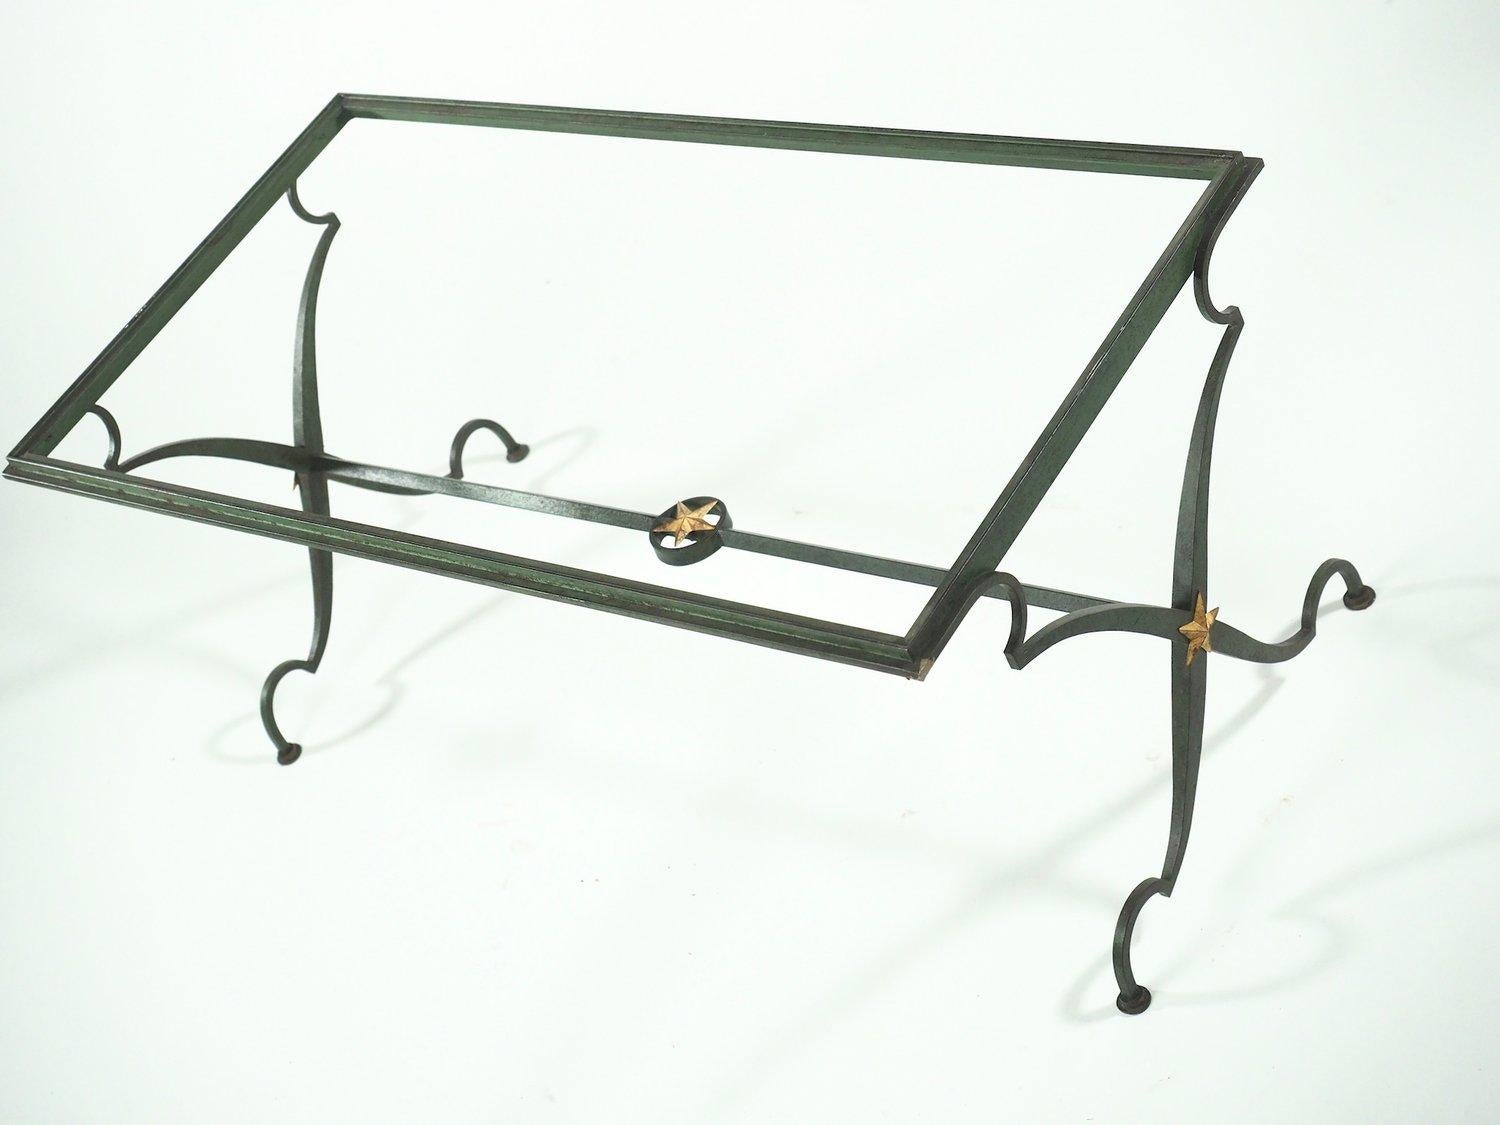 French Forties coffee table in the style of Andre Arbus. Forged iron with bronze verdigris patina and gilt details. Takes glass top.